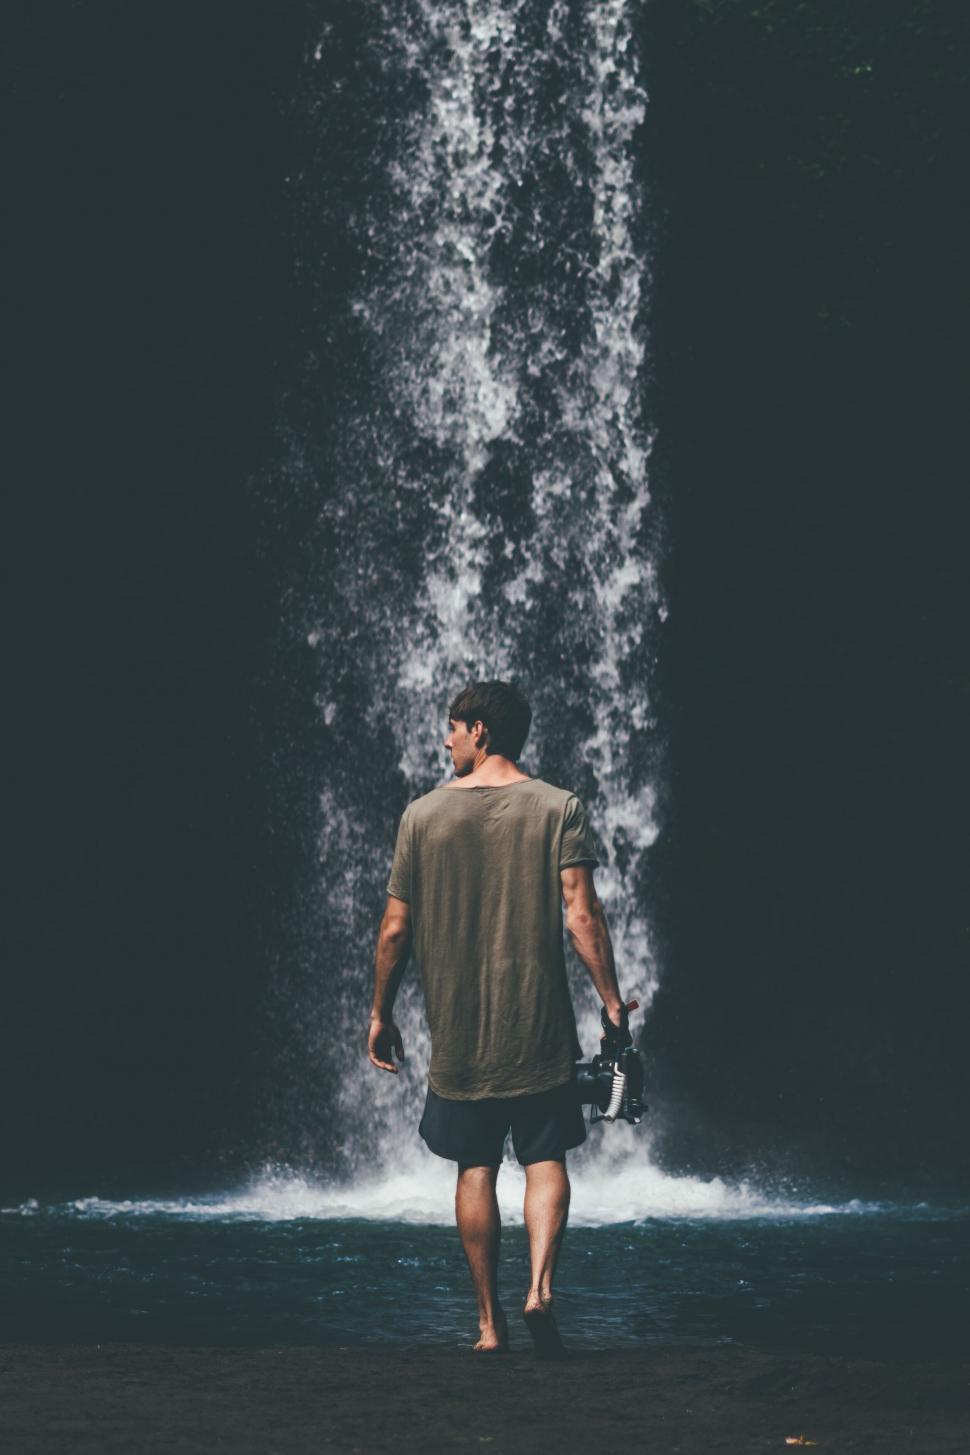 Free Image of Man admiring waterfall in forest 